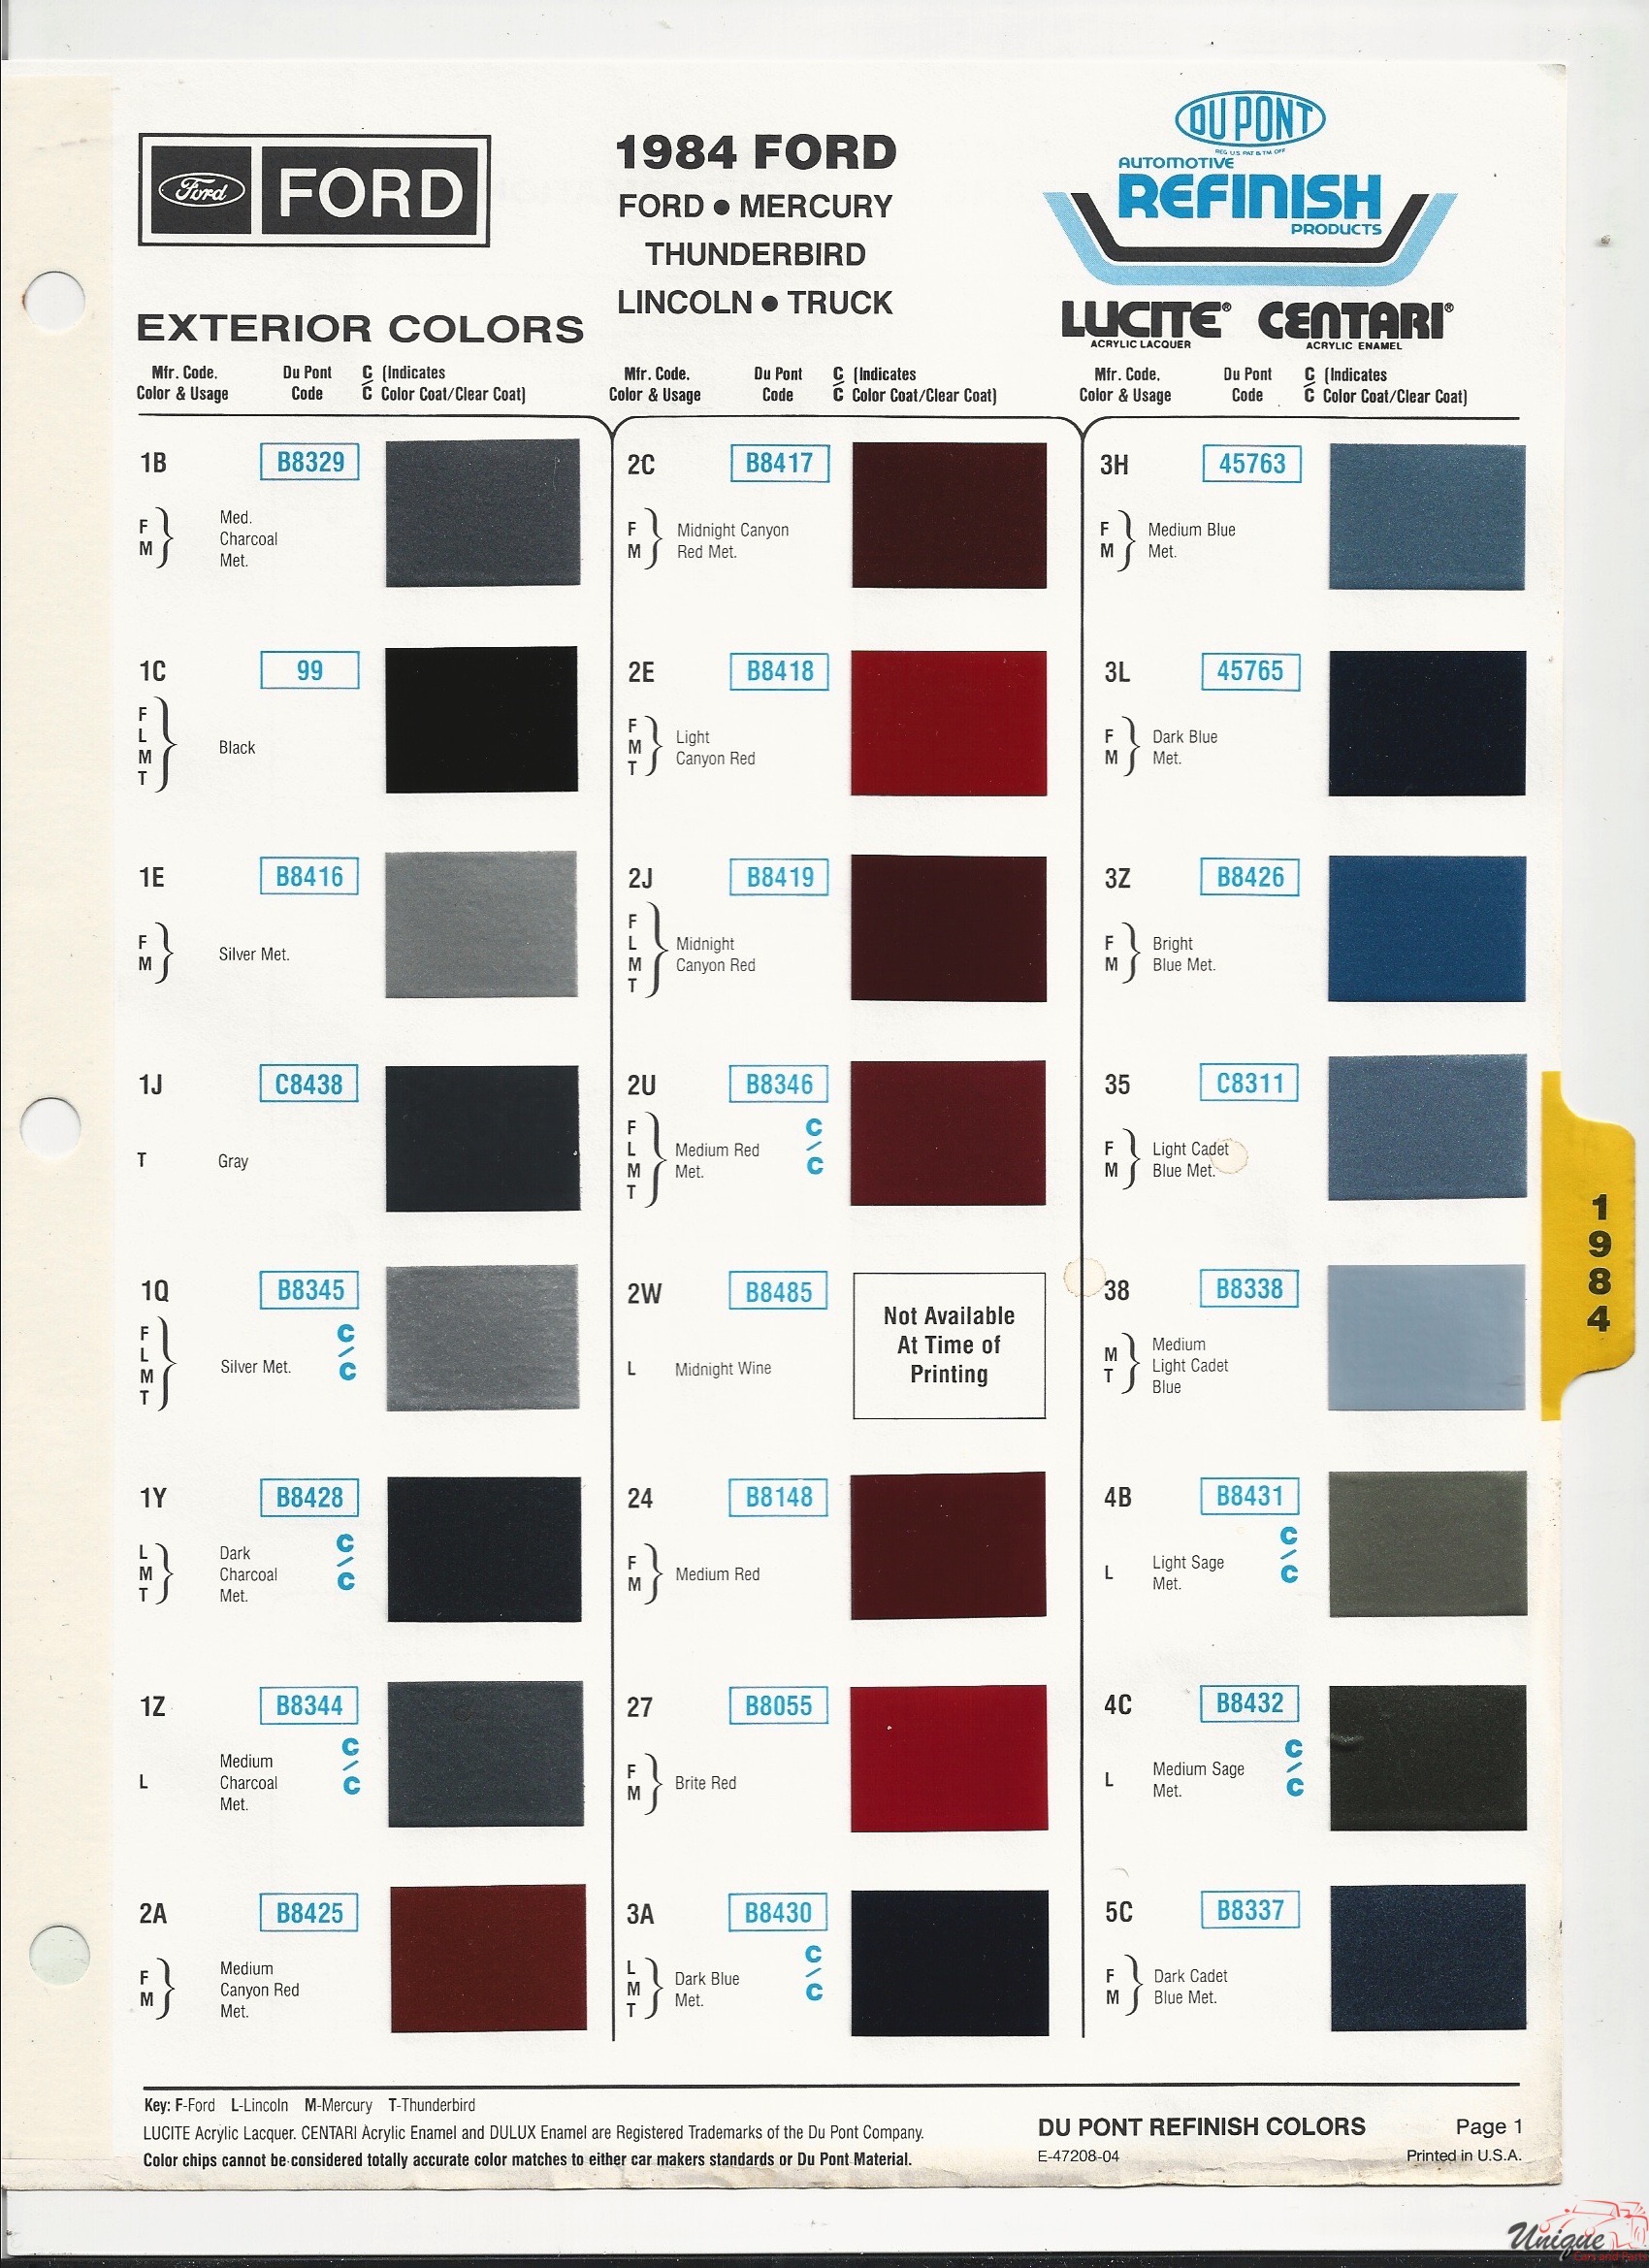 1984 Ford Page1 Paint Charts